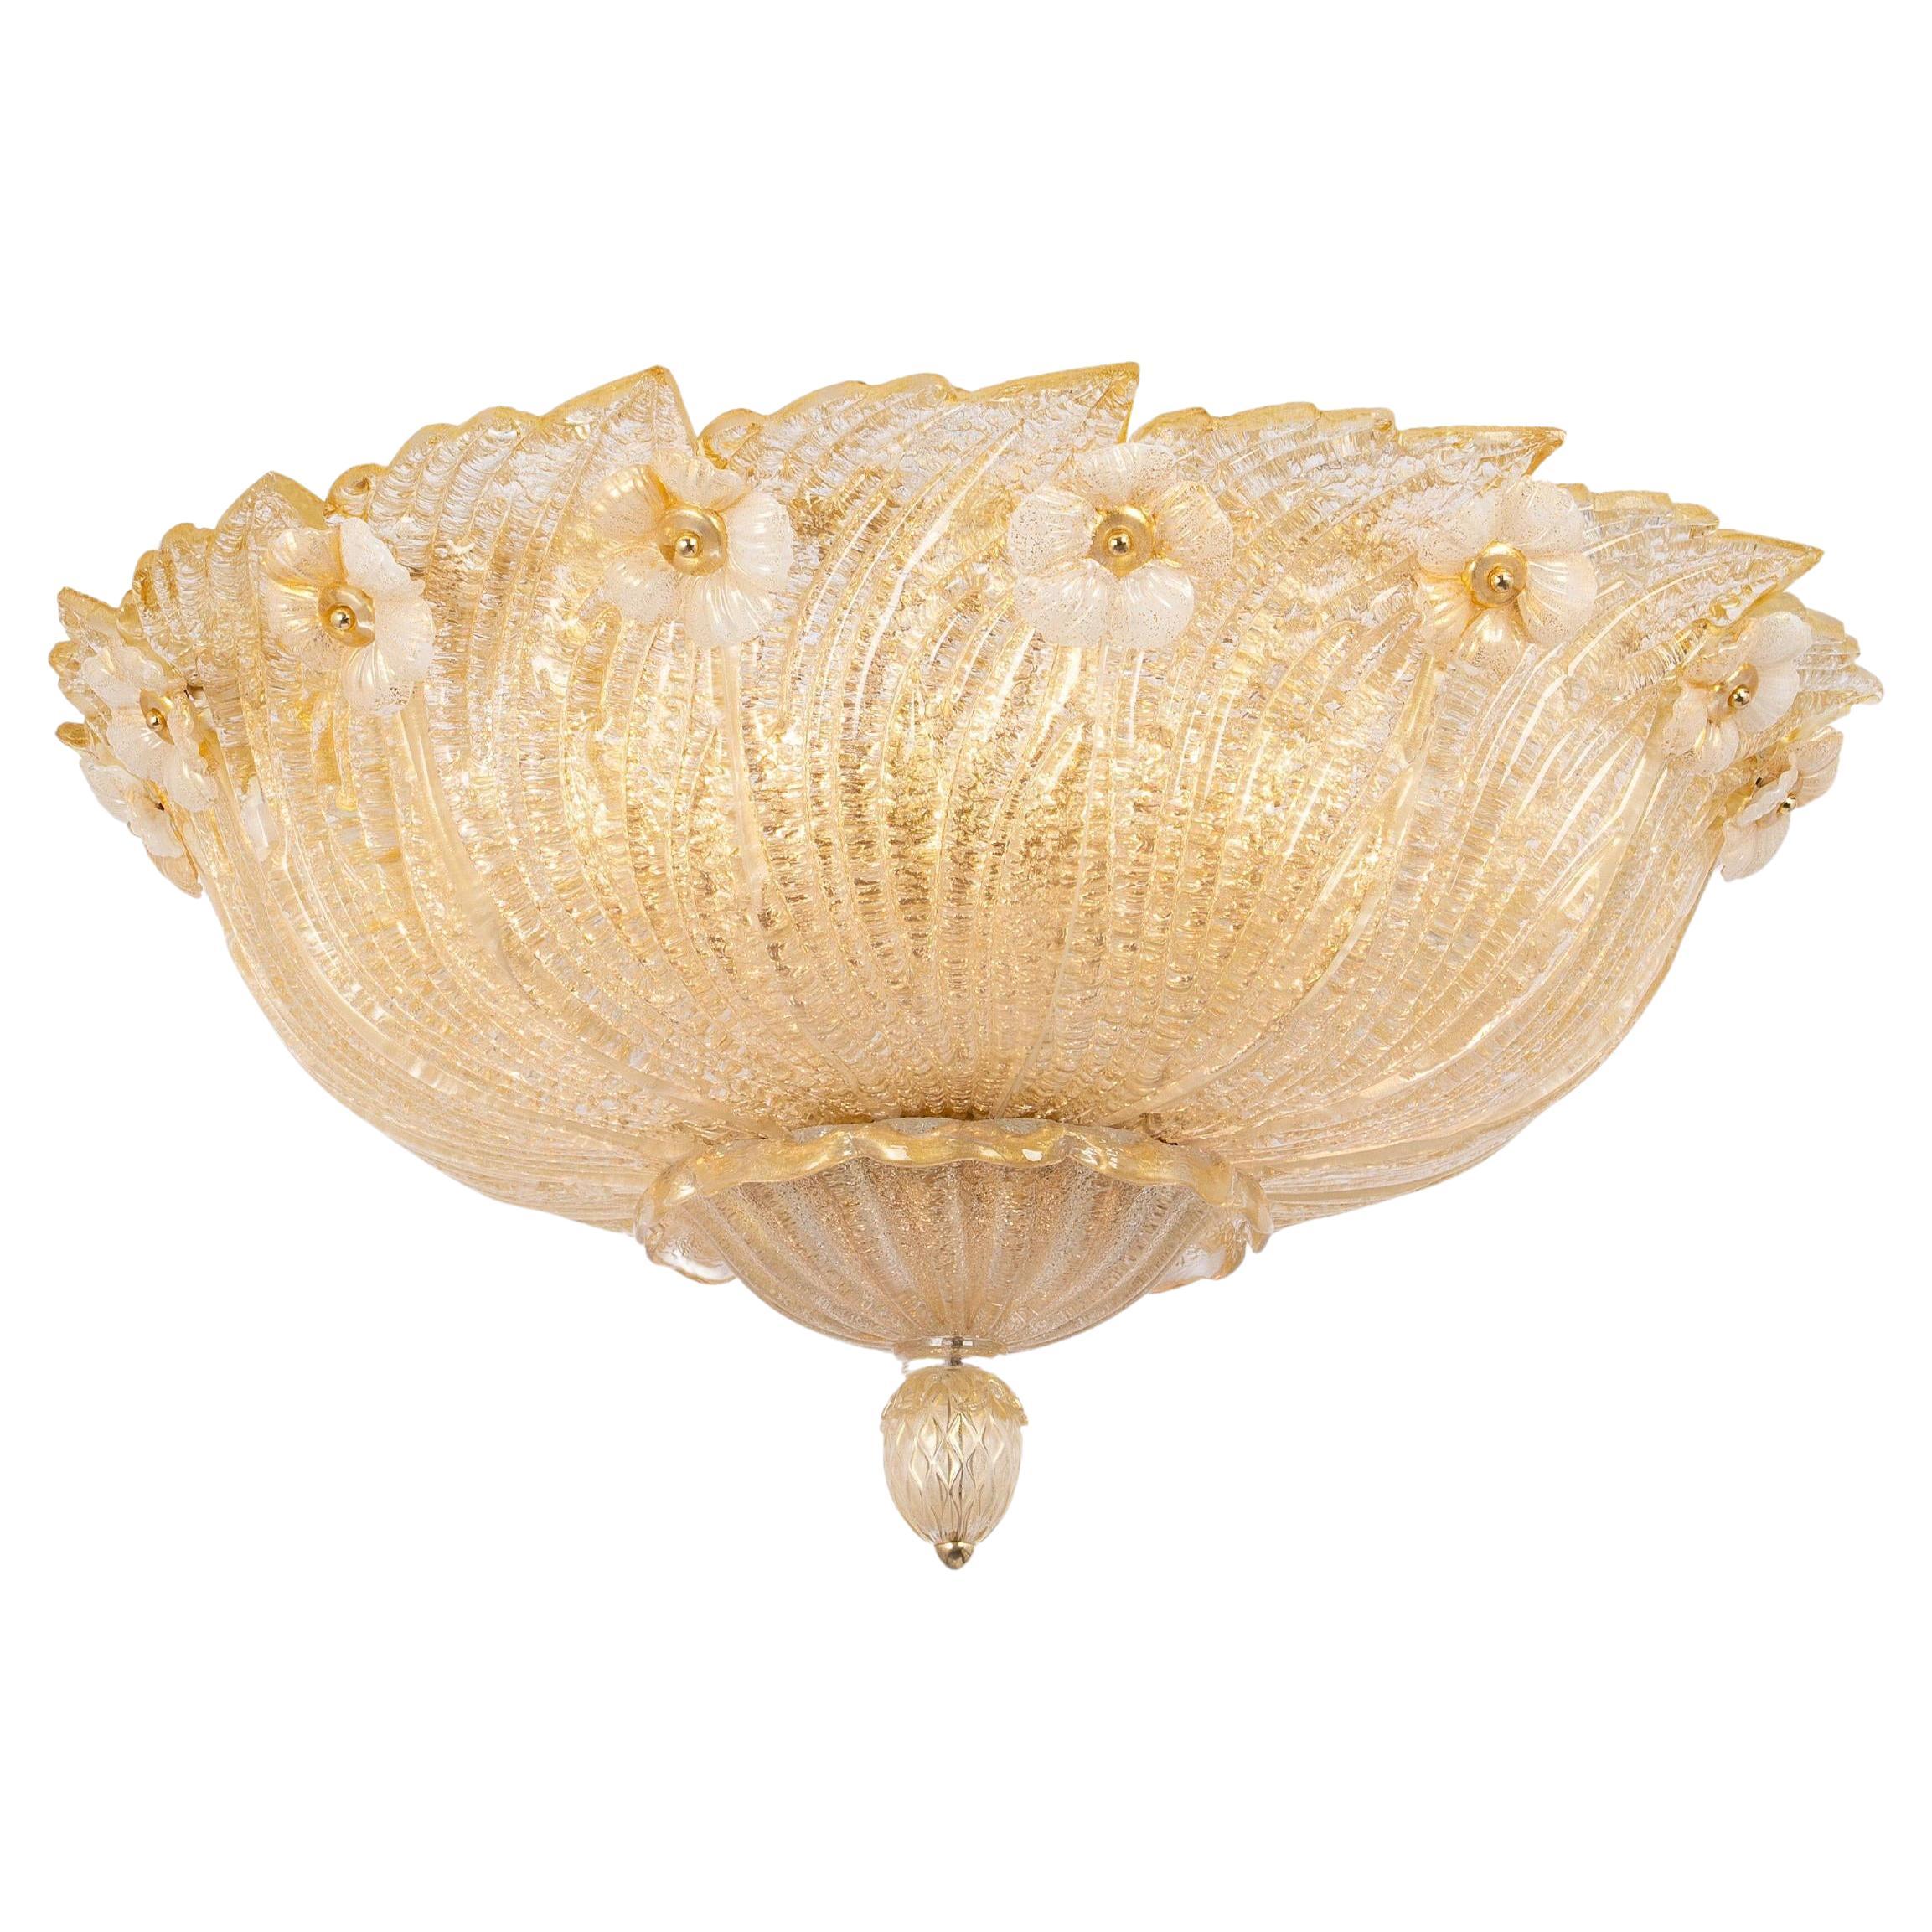 1 of 2 Large Grand Hotel Murano Ceiling Fixture by Barovier & Toso, Italy, 1970s For Sale